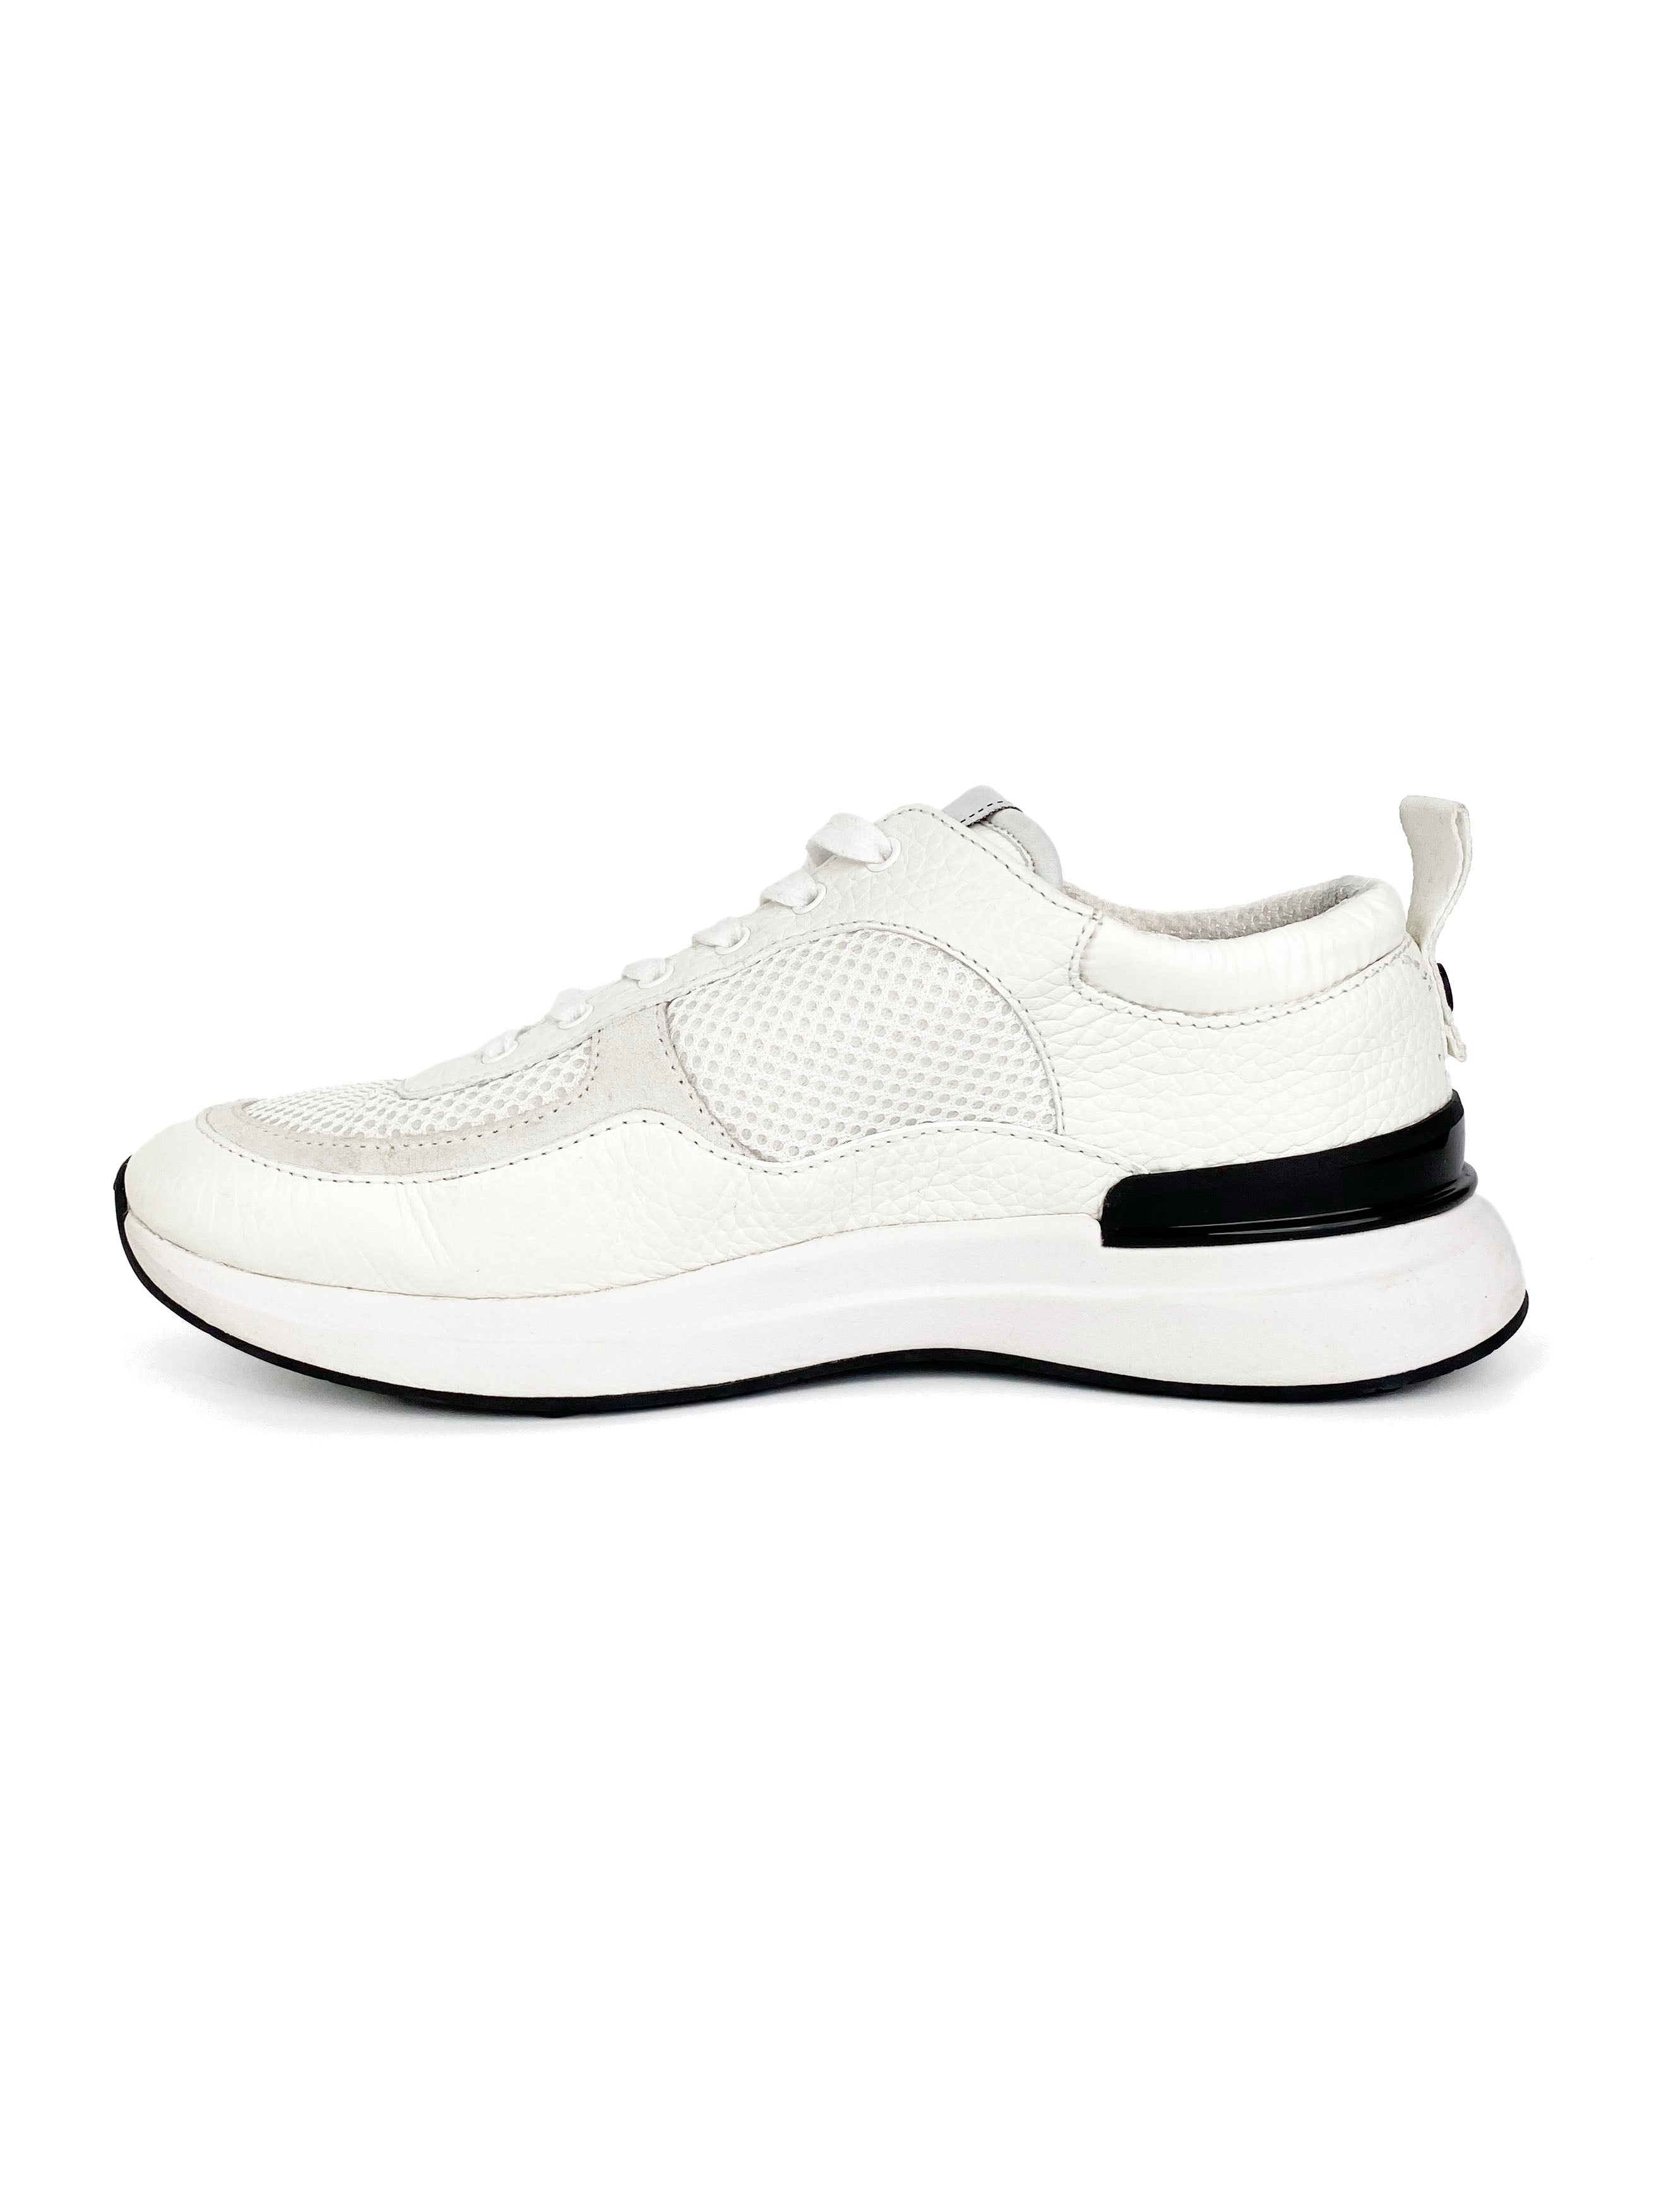 Chanel White CC Sneakers 38.5